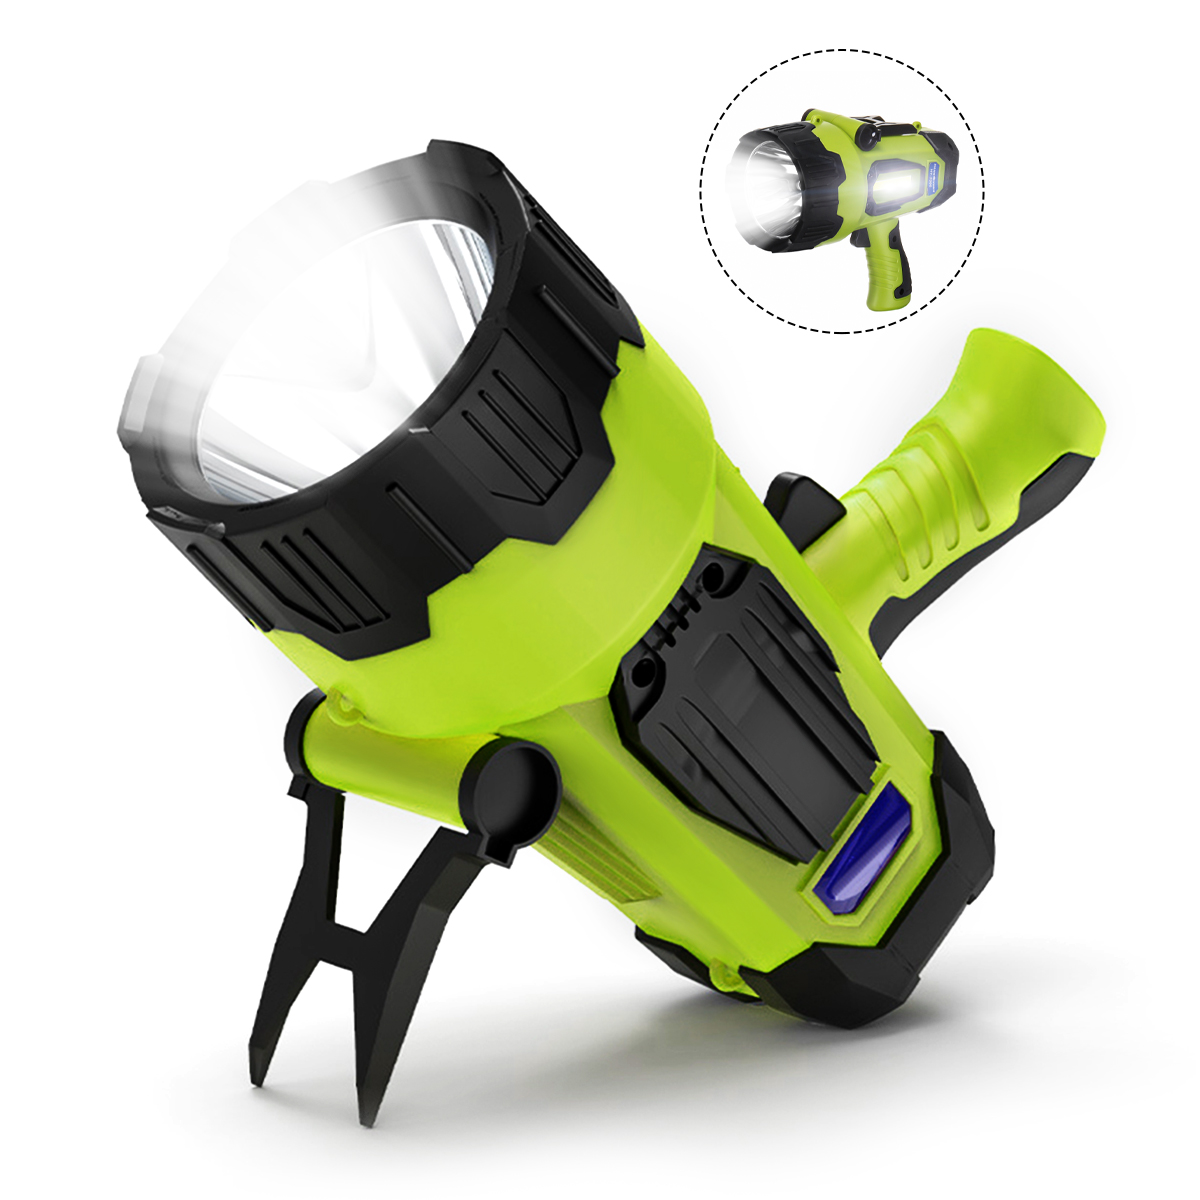 Rechargeable spotlight, Spot lights hand held large flashlight 5000 lumens handheld spotlight Lightweight and Super bright flashlight, for fishing and hunting, forestry, adventure - image 1 of 7